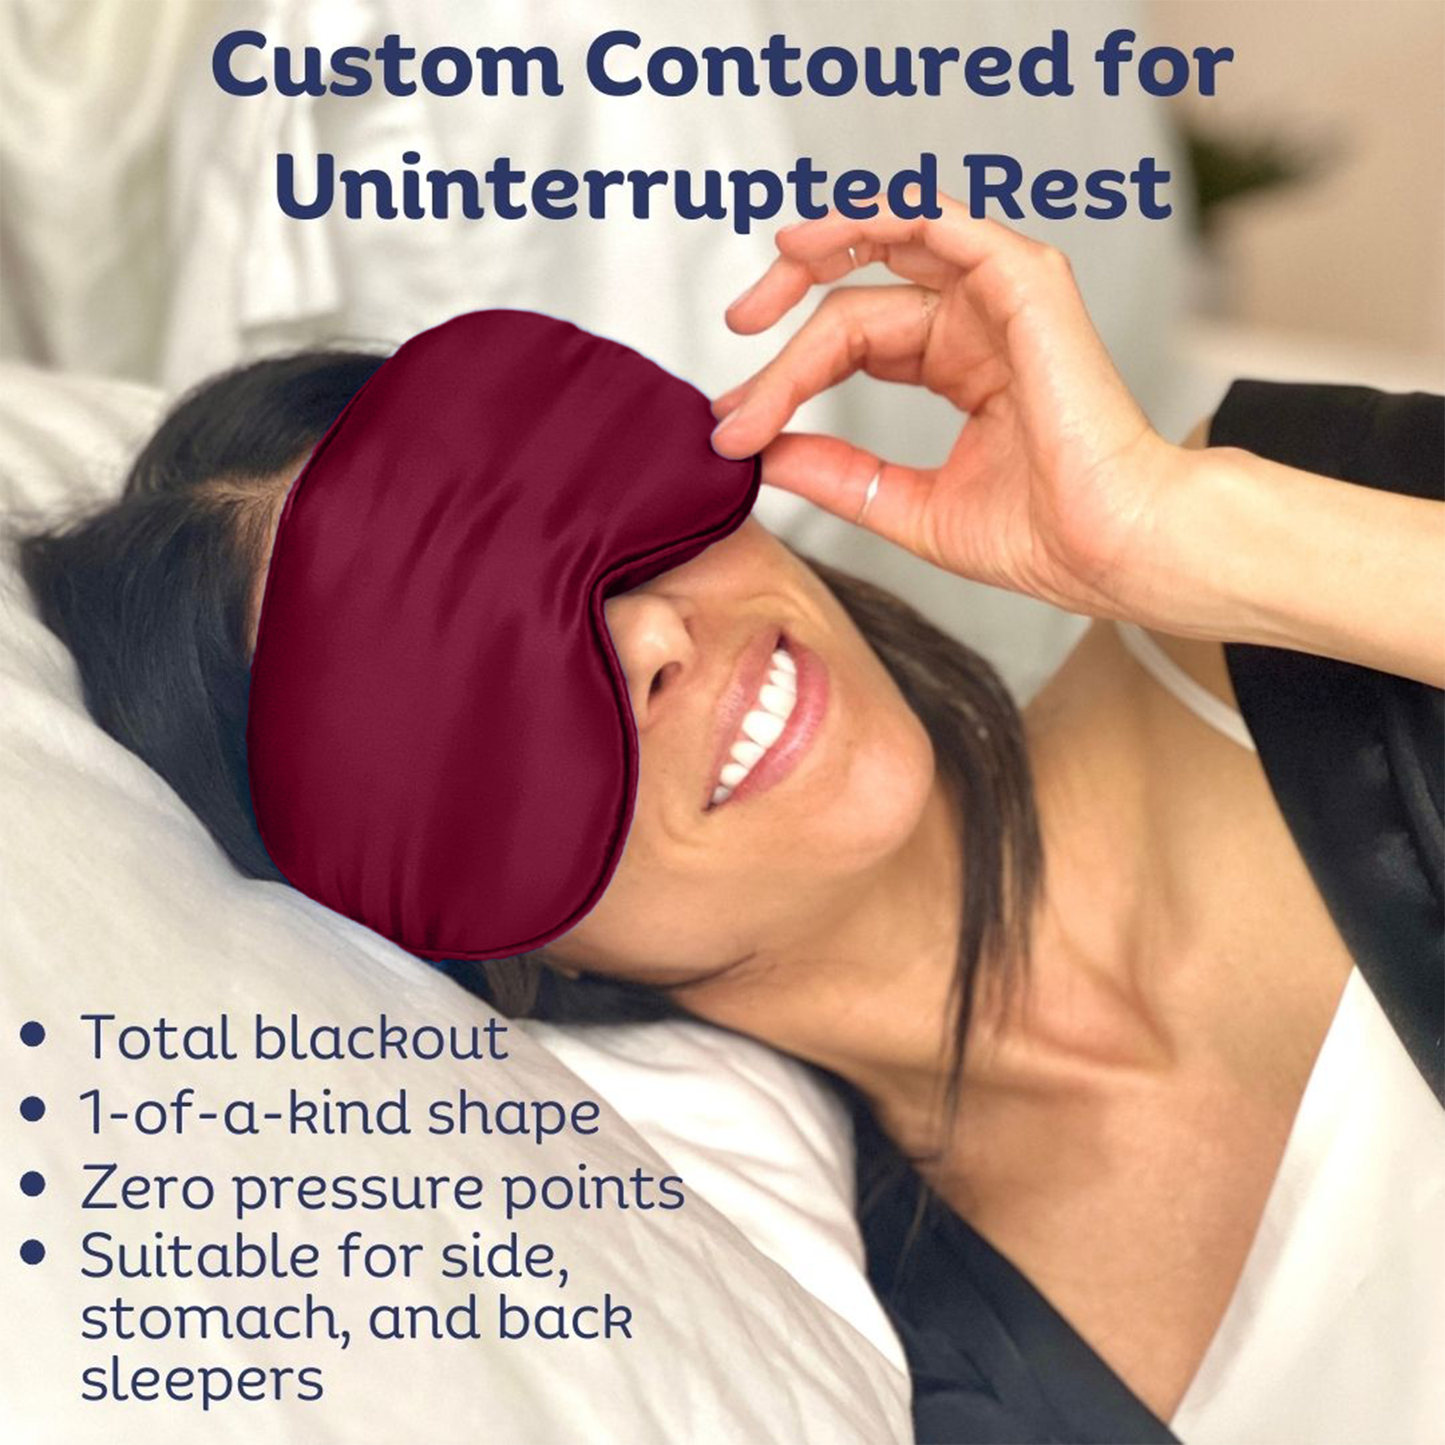 Sia Silk® Sleep Mask with extra deep eye cups for long lashes - Merlot